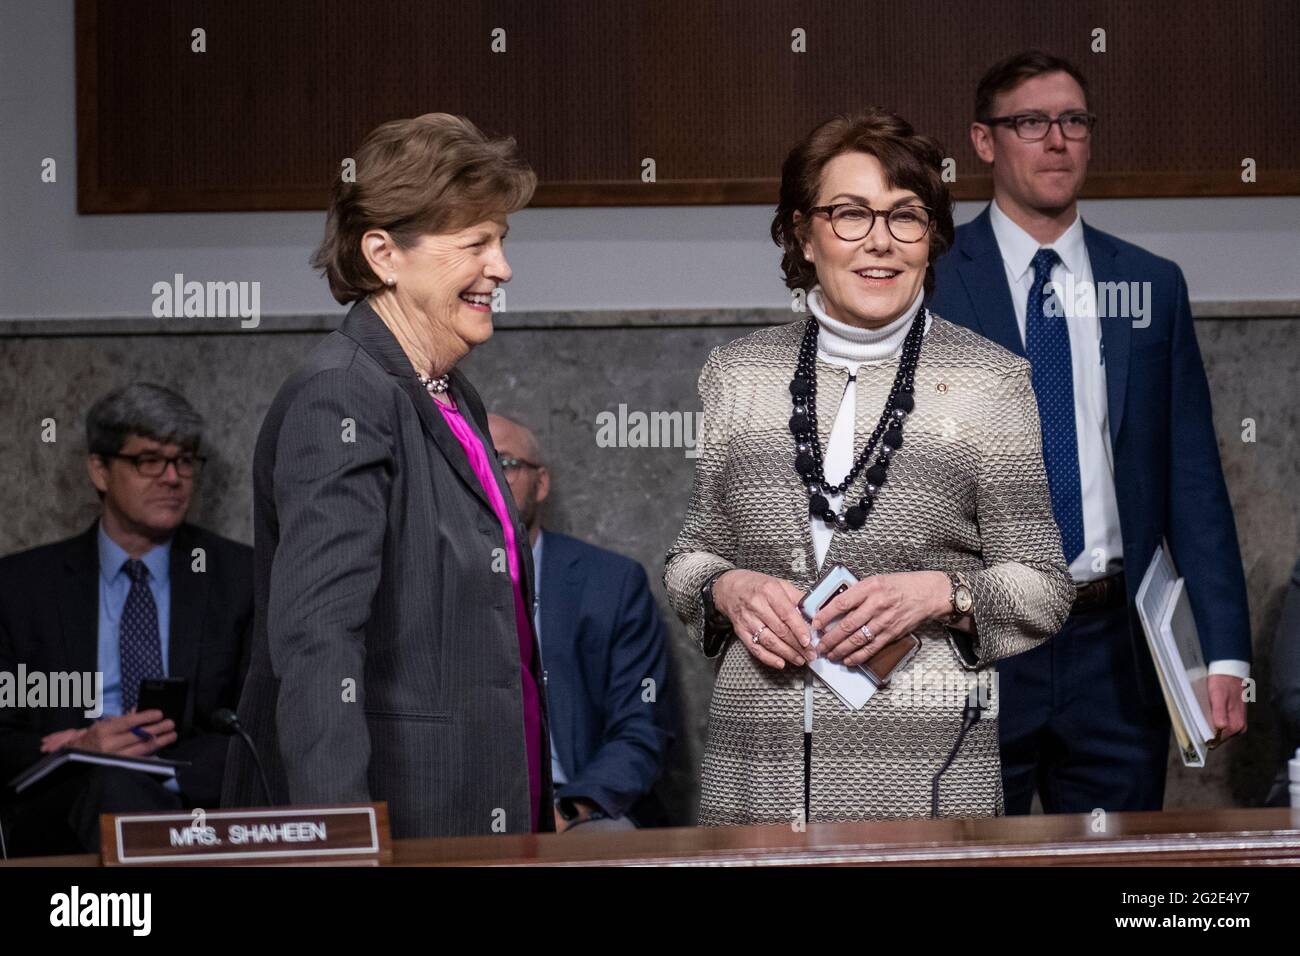 United States Senator Jeanne Shaheen (Democrat of New Hampshire), left, talks with United States Senator Jacky Rosen (Democrat of Nevada), right, during a Senate Committee on Armed Services hearing to examine the Department of Defense budget posture in review of the Defense Authorization Request for fiscal year 2022, in the Dirksen Senate Office Building in Washington, DC, Thursday, June 10, 2021. Credit: Rod Lamkey/CNP /MediaPunch Stock Photo